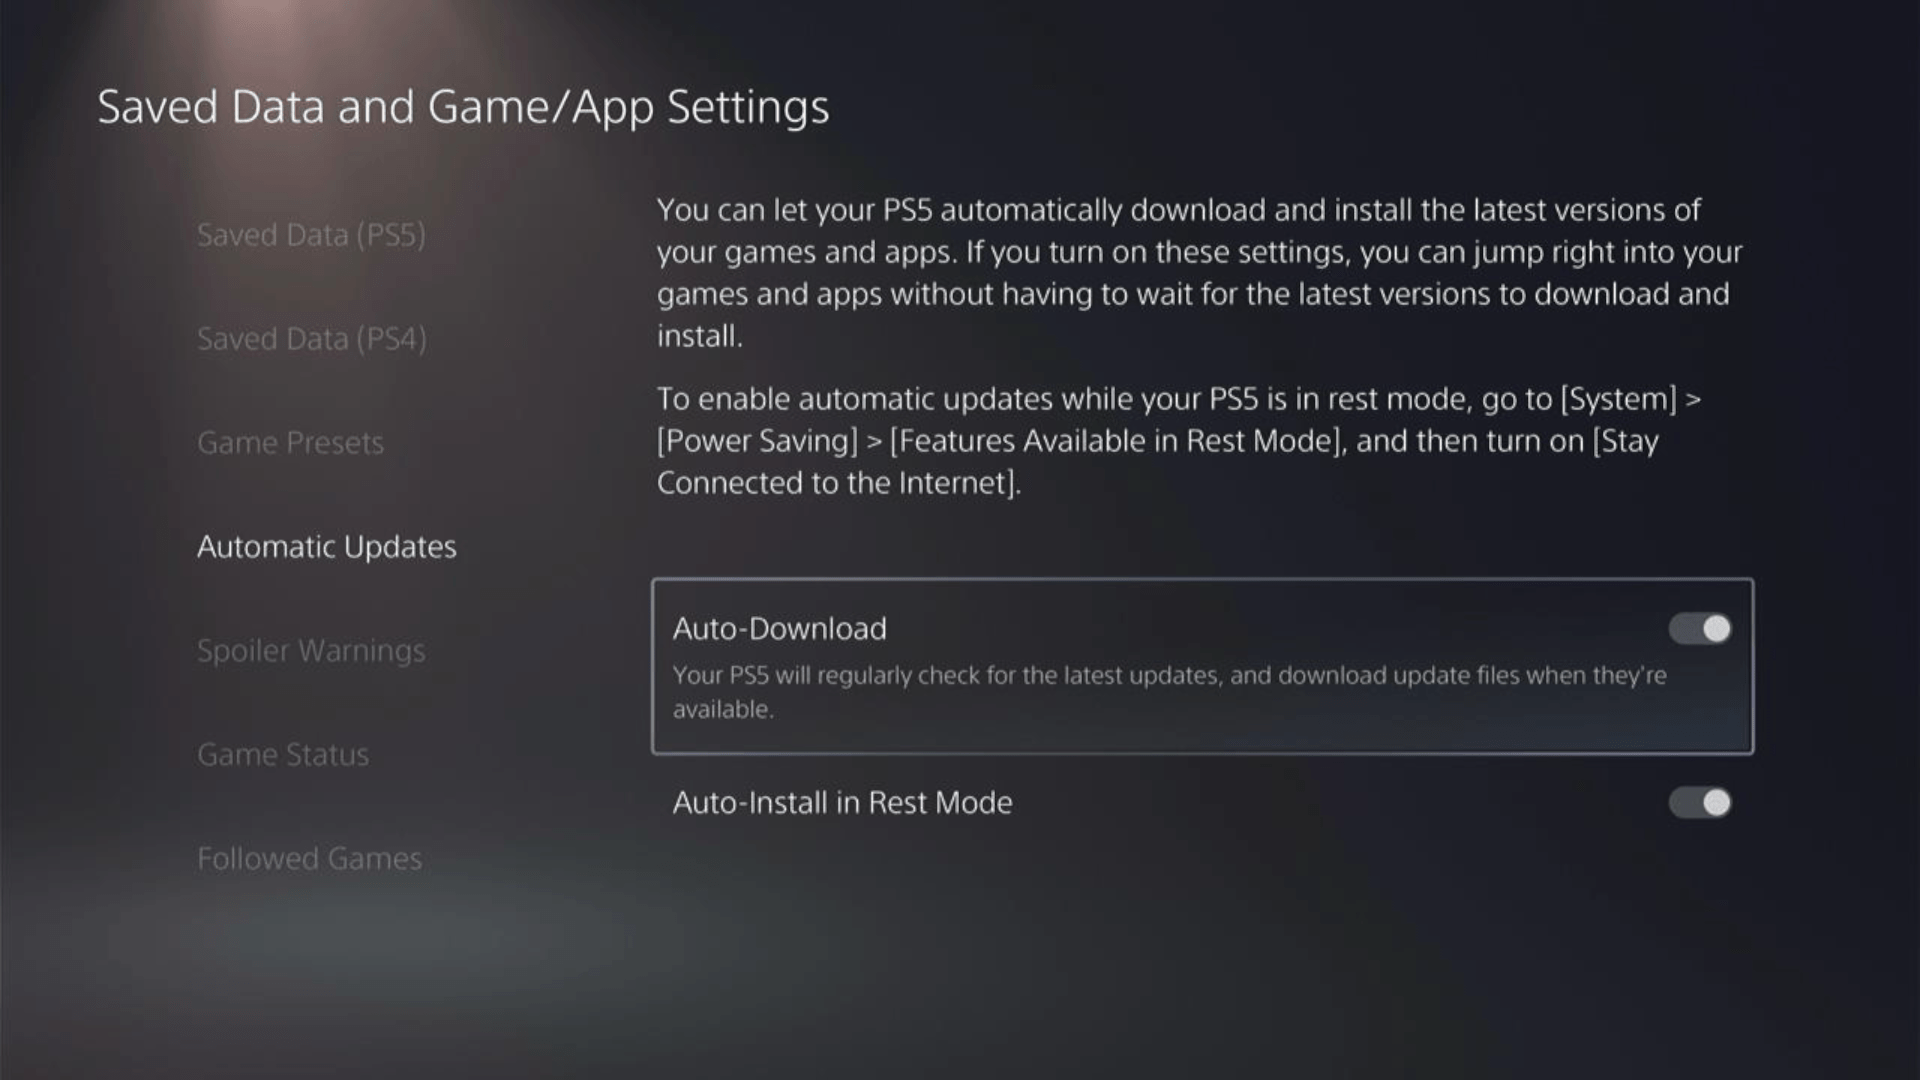 In the Saved Data and Game/App Settings window, select Automatic Updates from the left sidebar to enable automatic game updates to avoid CE-108255-1 Error